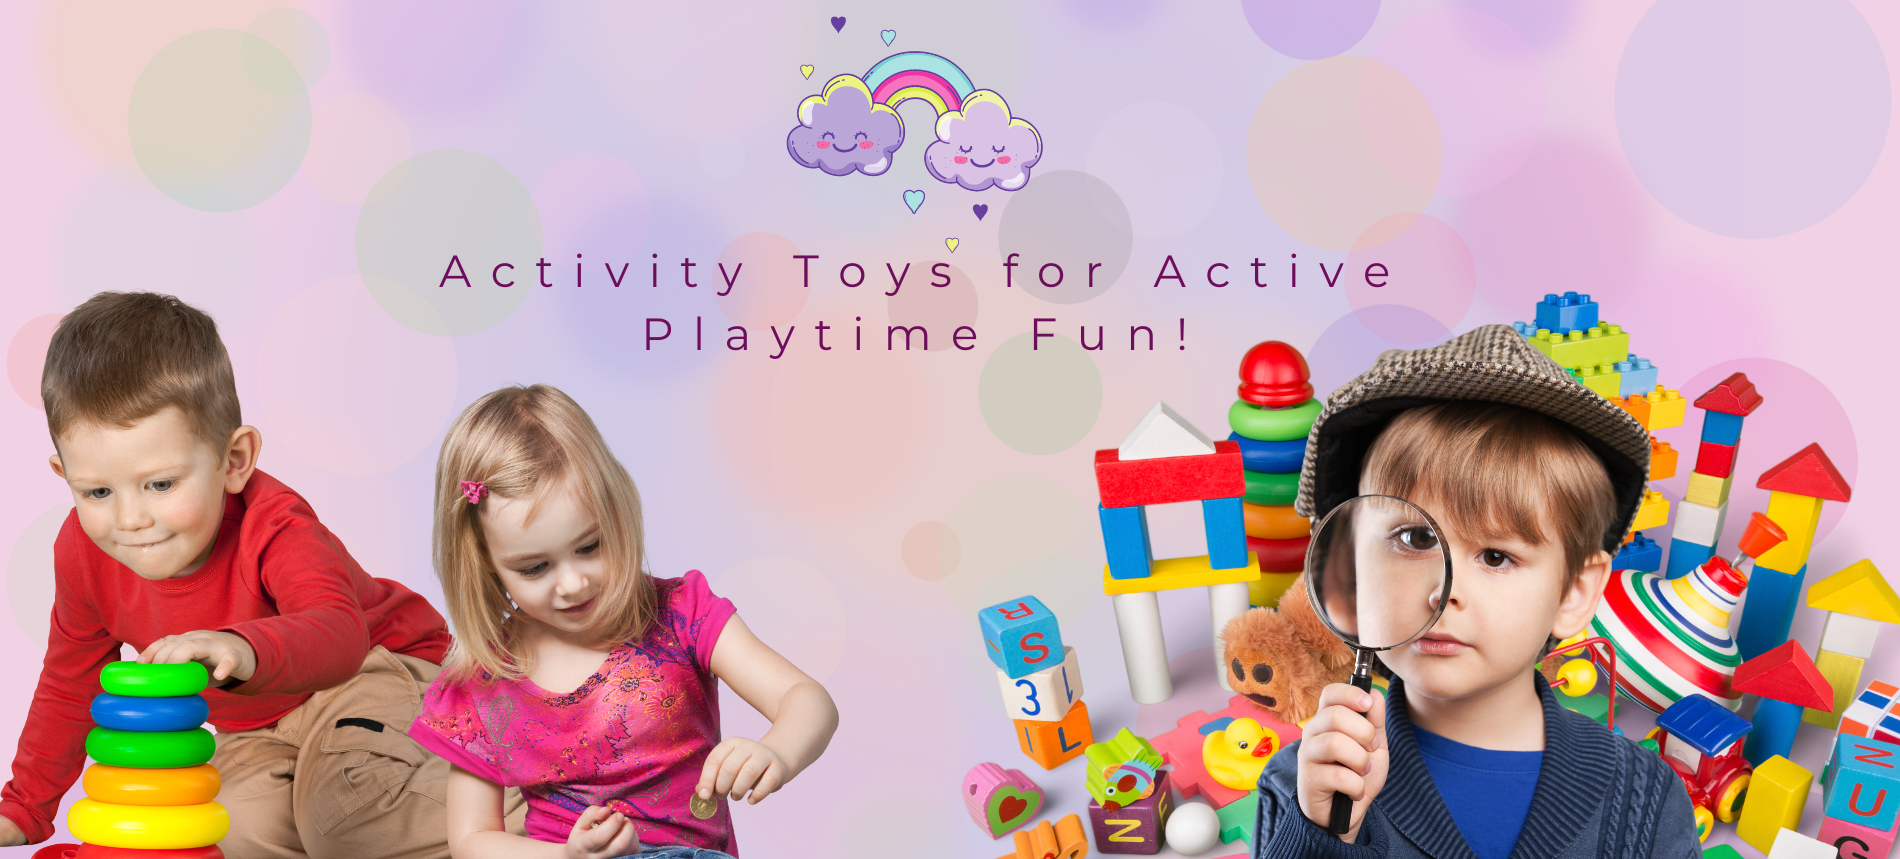 activity%20toys%203.png?1696524568998